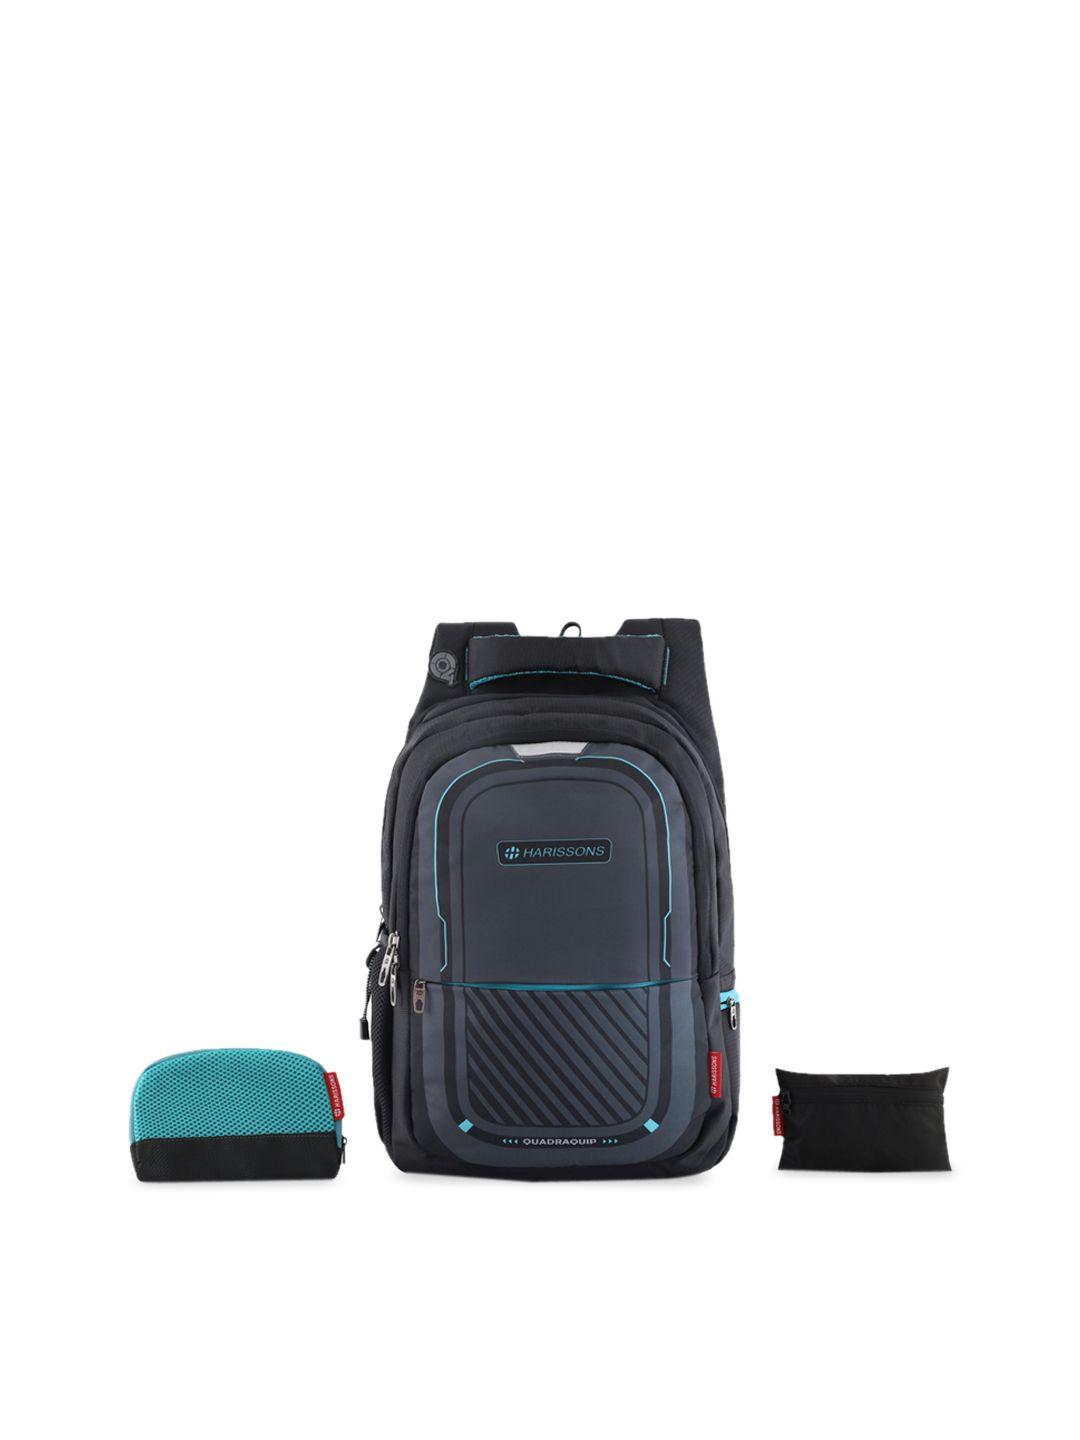 harissons unisex black striped with reflective strip backpack